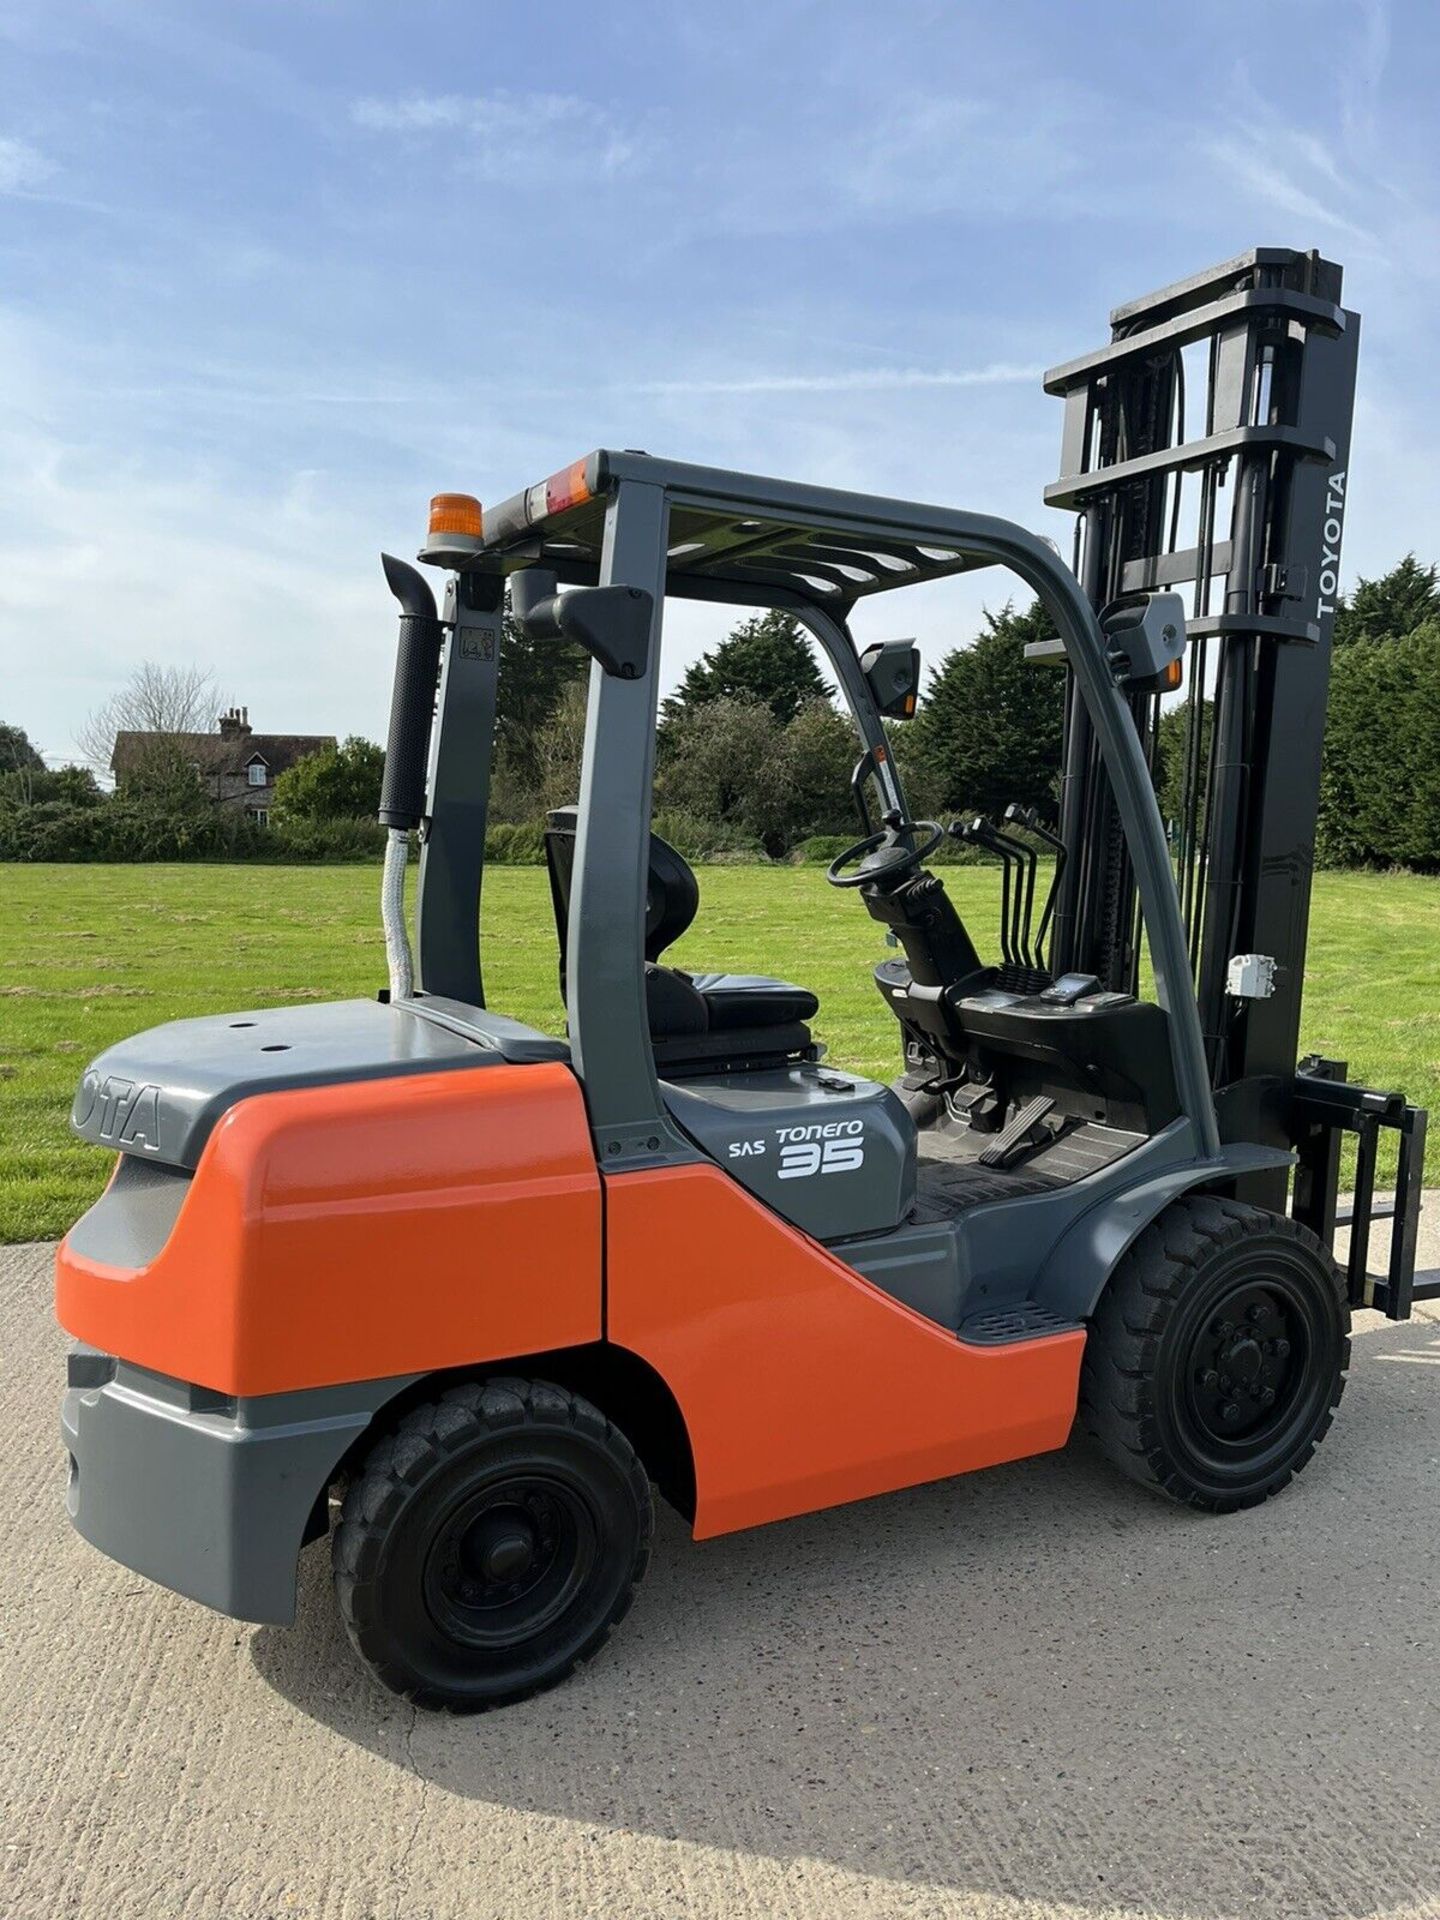 Toyota 3.5 Tonne Diesel Forklift Low Hours 2016 - Image 4 of 6